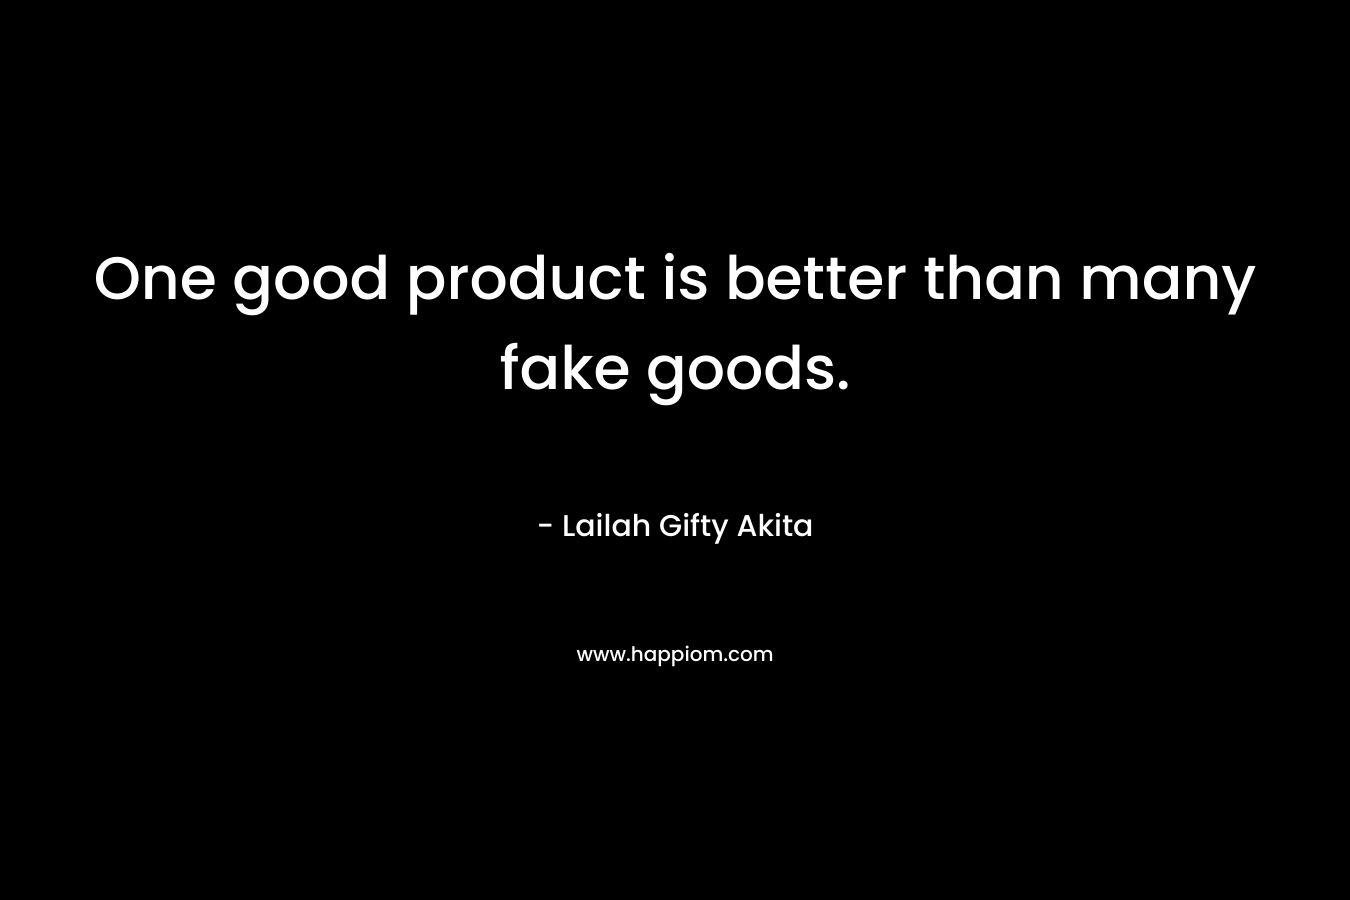 One good product is better than many fake goods. – Lailah Gifty Akita